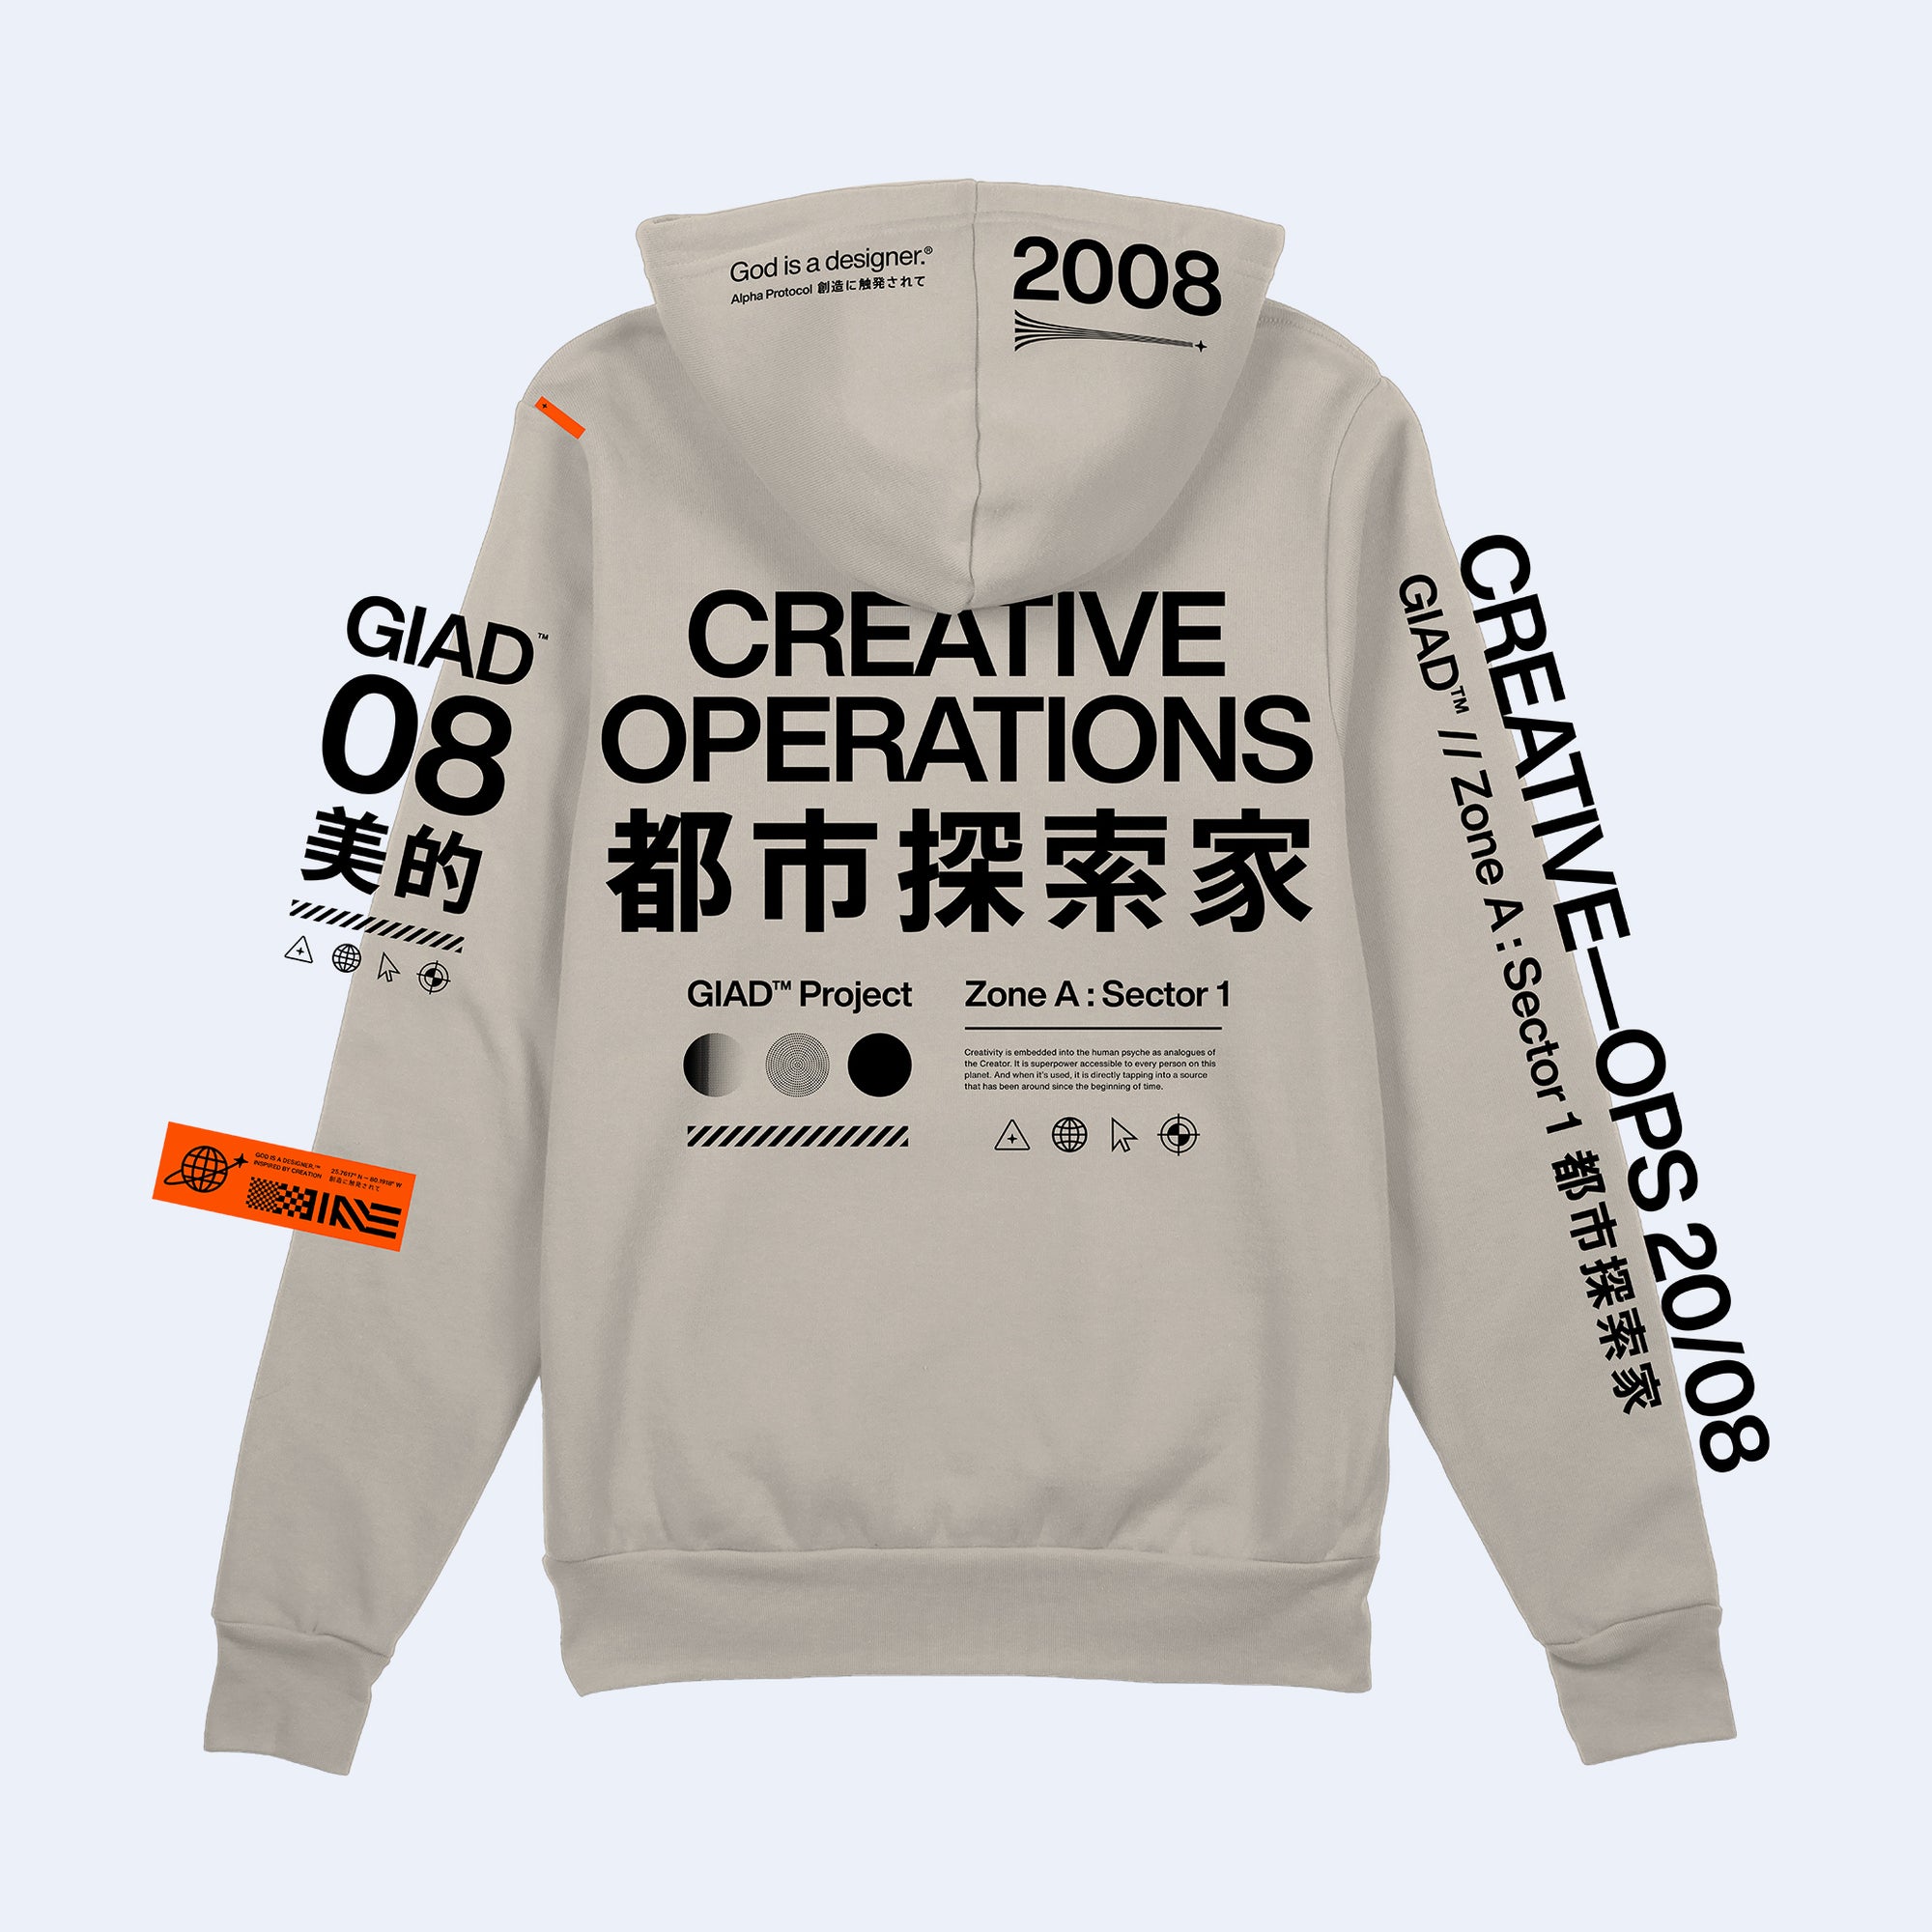 GIAD™ Creative Operations Hooded Pullover [Sand] - God is a designer.®